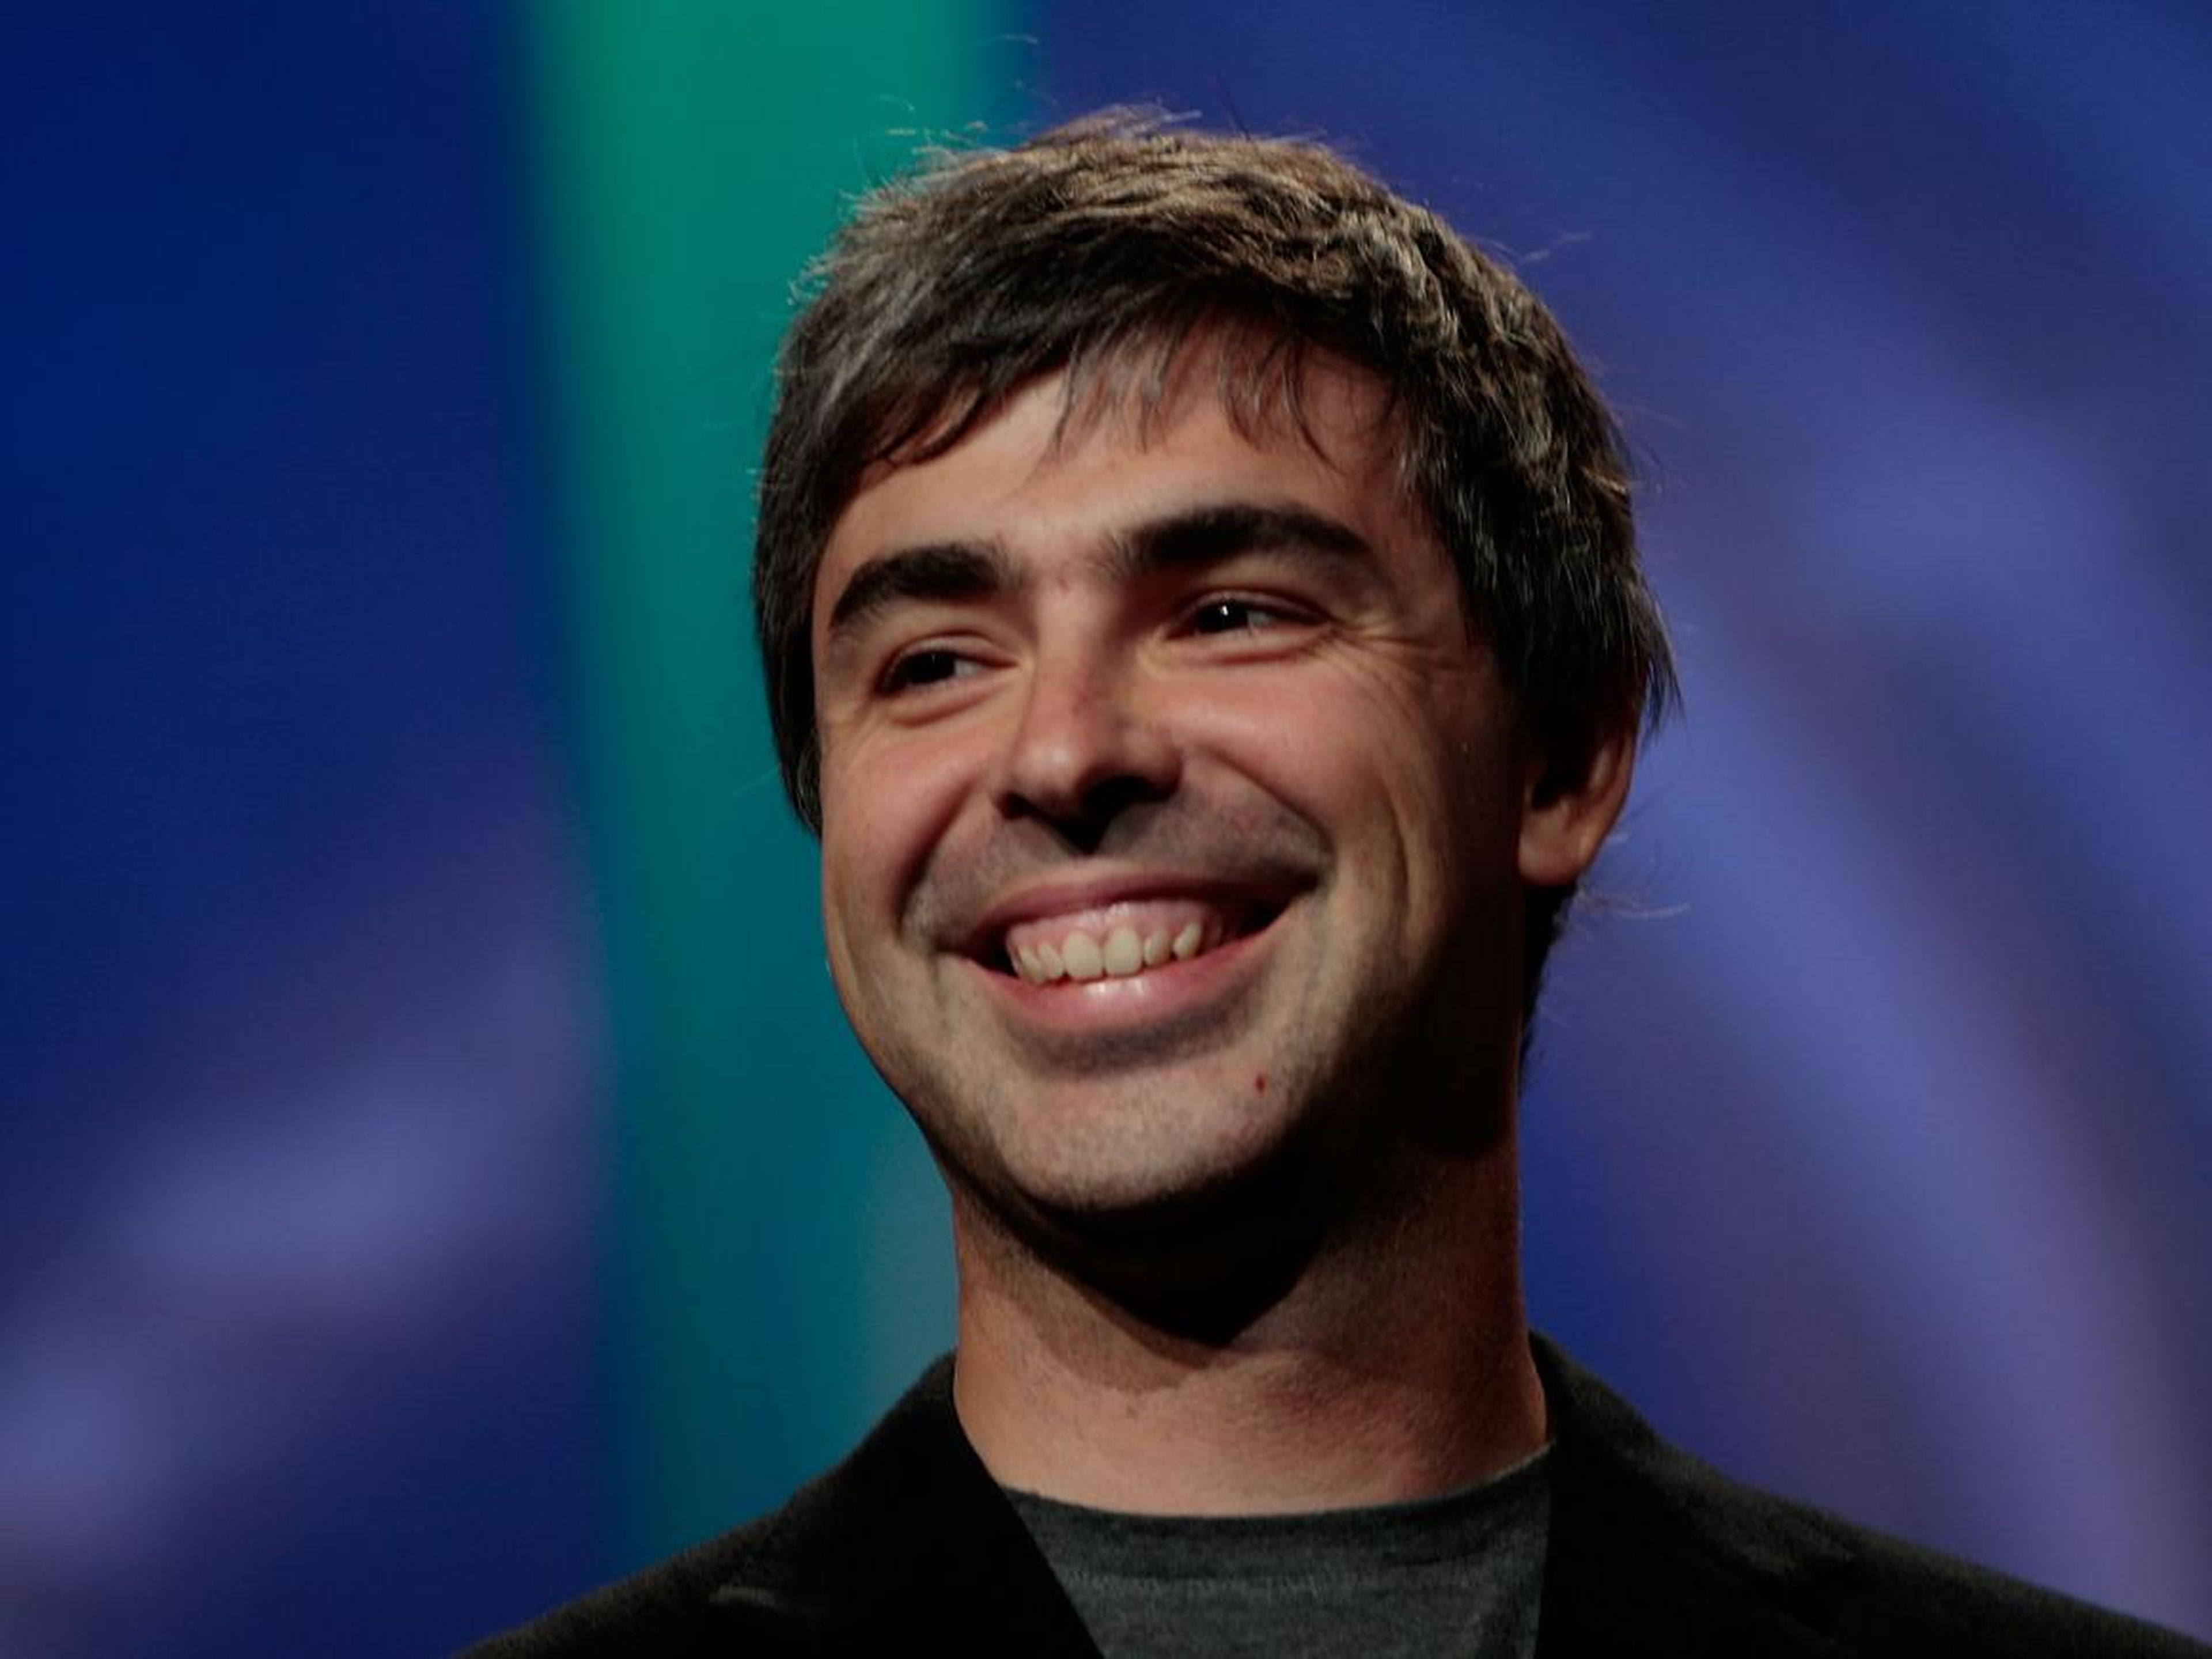 Google officially became Alphabet in October, 2015, with the hope of allowing businesses units to operate independently and move faster. Google cofounder Larry Page is the CEO of the umbrella company, Alphabet.